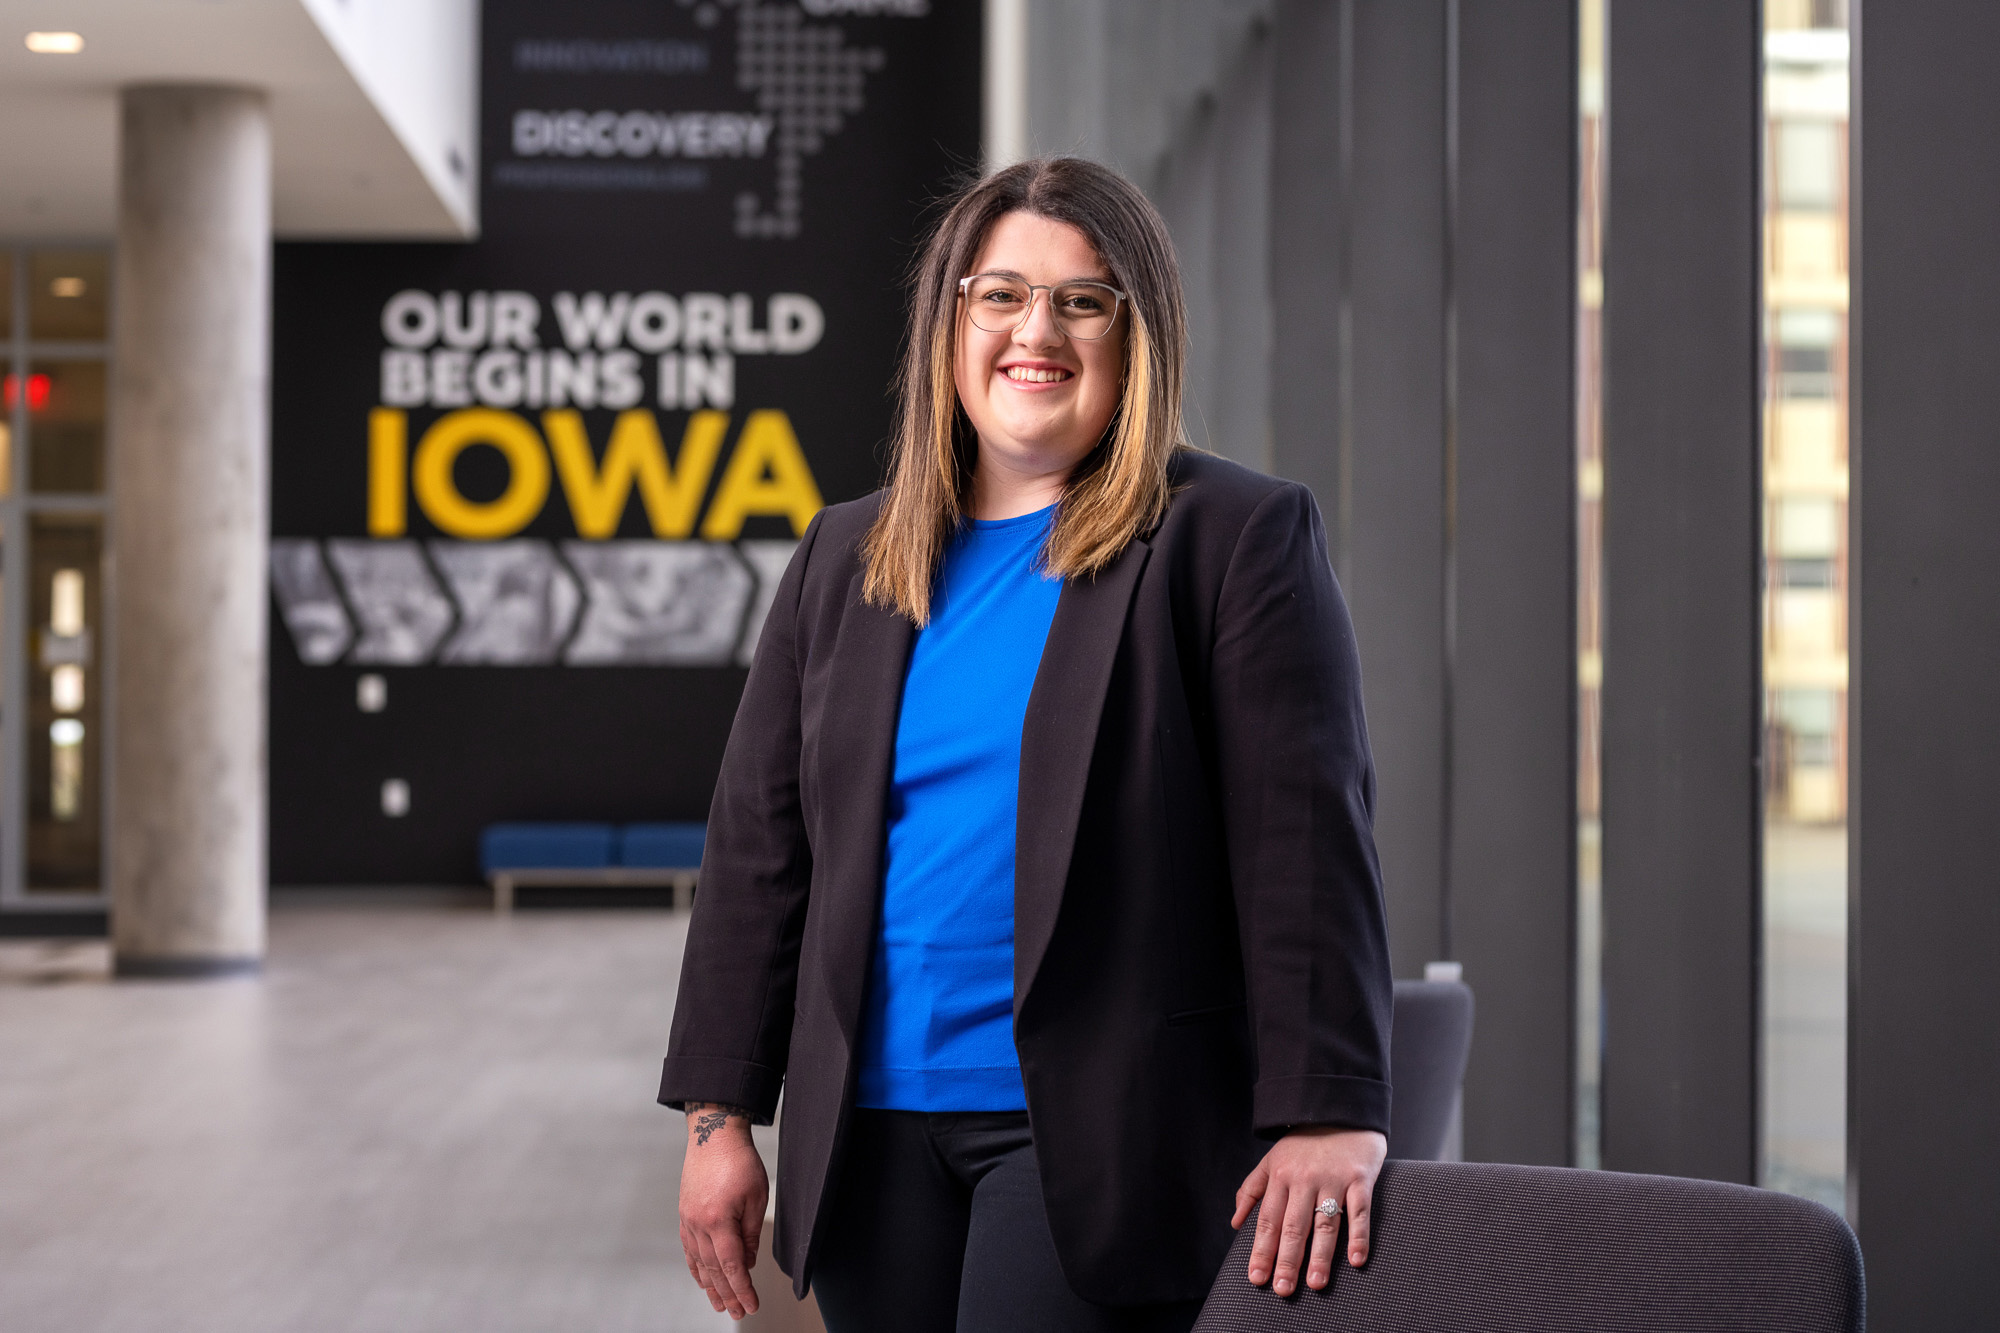 a woman standing inside the College of Pharmacy Building, her hand on a chair, with a sign that says "our world begins in Iowa" in the background